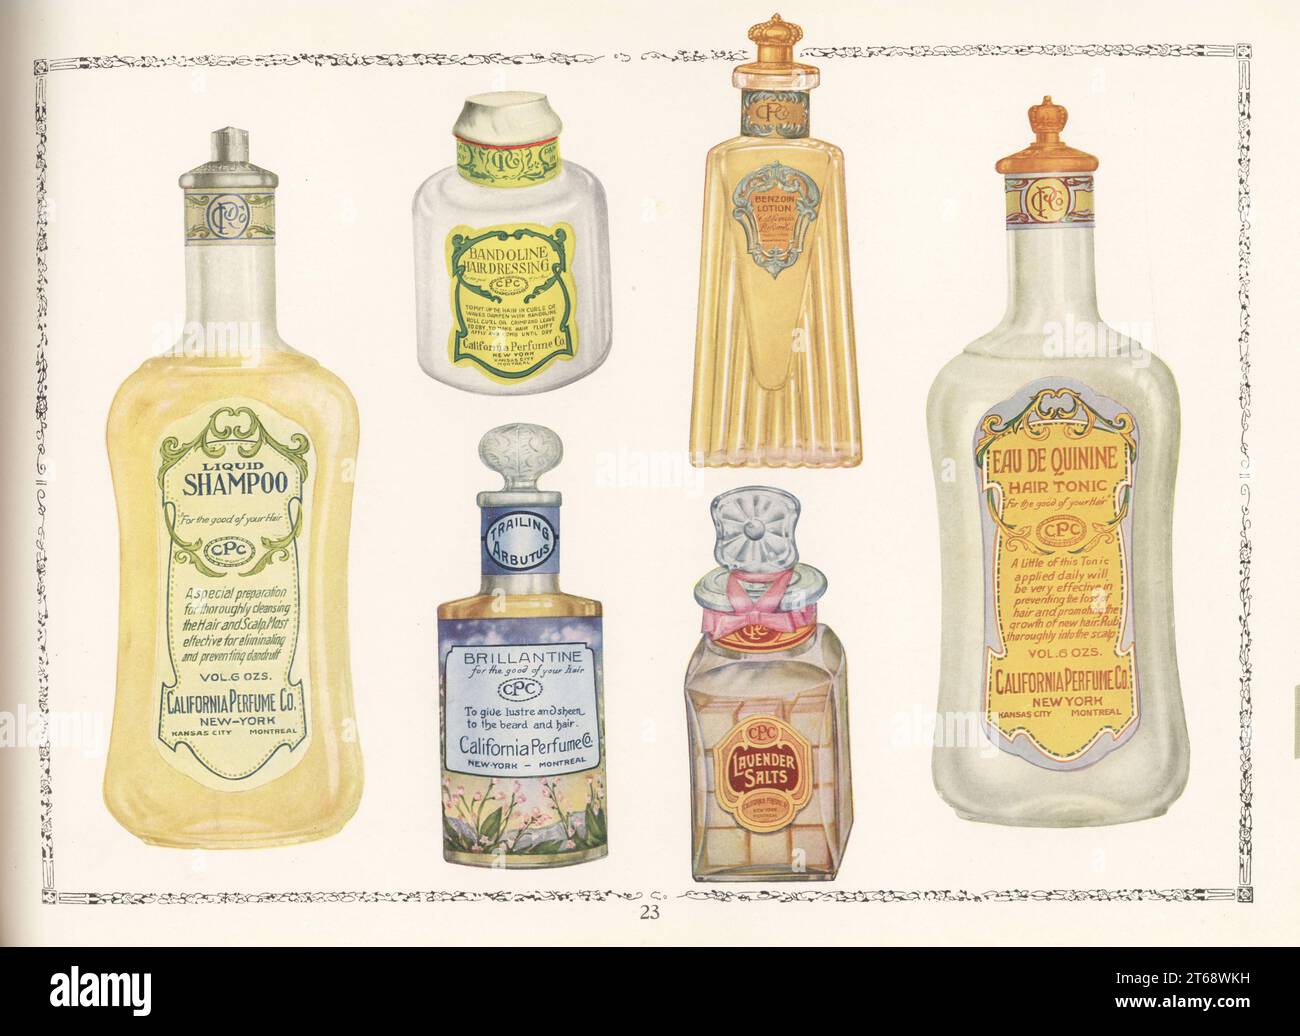 CPC brand cosmetics from 1927. Bottle of Liquid Shampoo, Brillantine, Bandoline hair dressings, Benzoin Lotion, Lavender Salts, and Eau de Quinine hair tonic. Chromolithograph by an unknown artist from the California Perfume Company (later Avon) product catalog, New York, Kansas, Montreal, 1927. Stock Photo